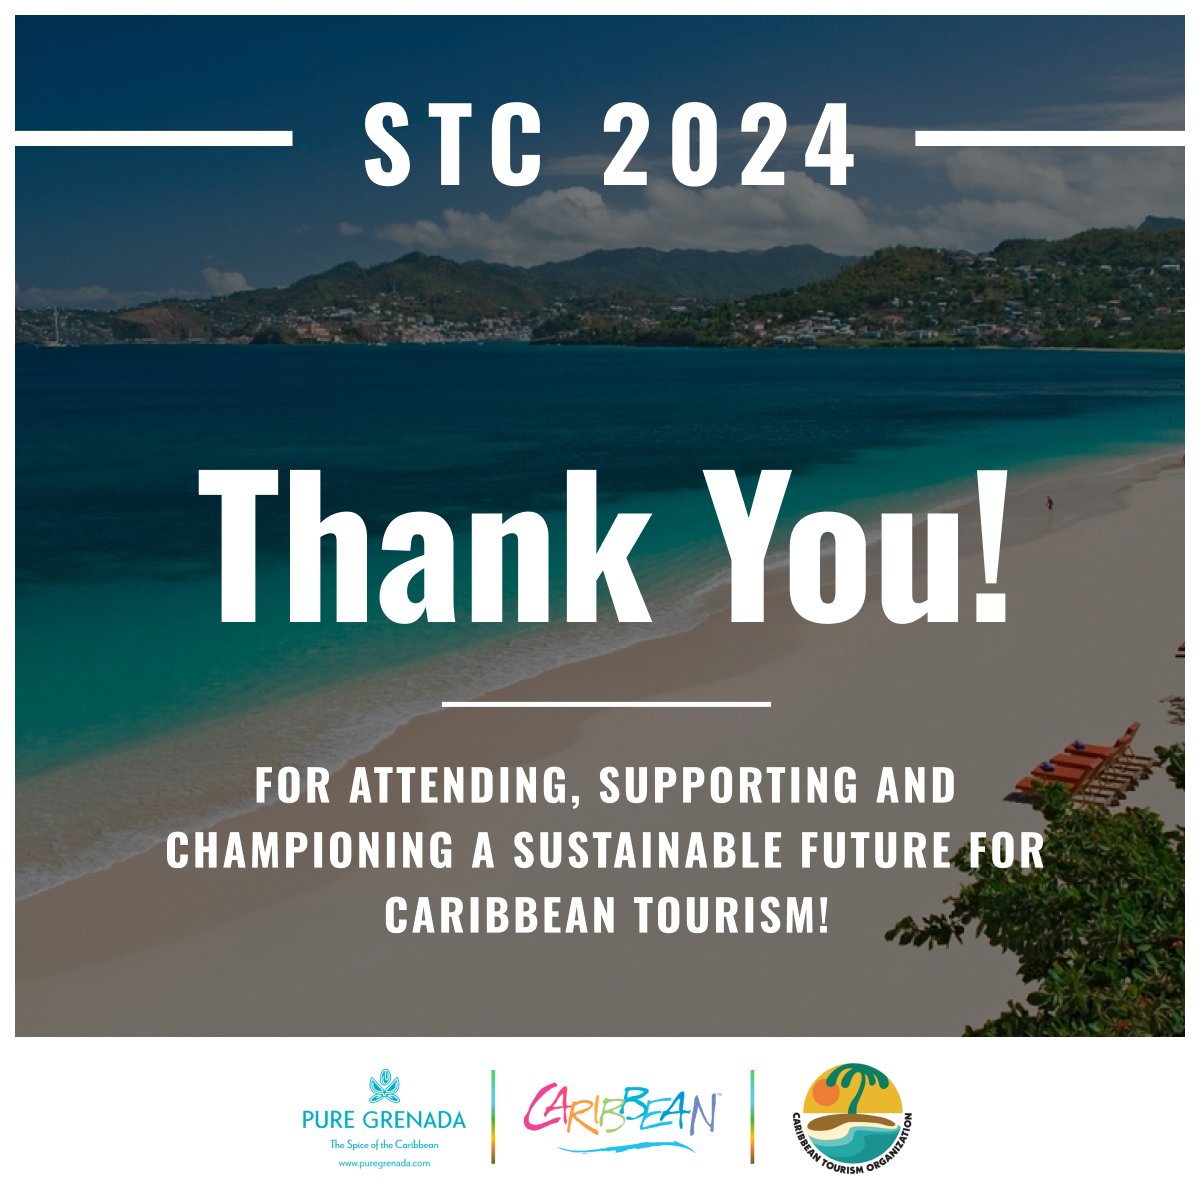 Thank you to all our speakers, sponsors, partners, and delegates for joining us in #PureGrenada to champion a sustainable future for Caribbean tourism! #STC2024 was one of our best ever, thanks to our incredible hosts in Grenada and your invaluable contributions. @puregrenada